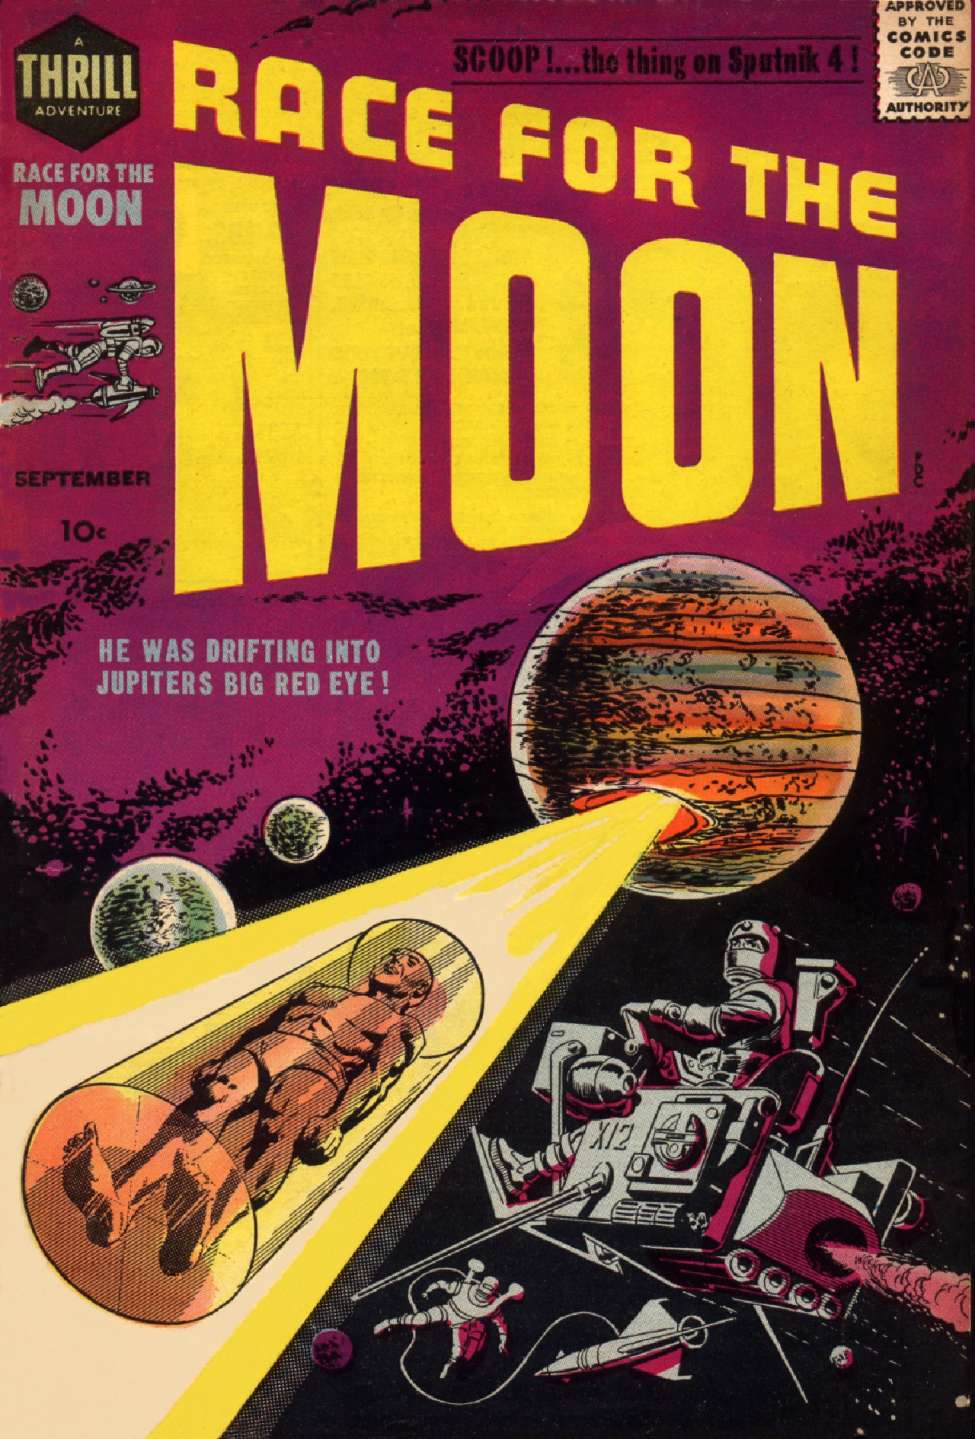 Comic Book Cover For Race for the Moon 2